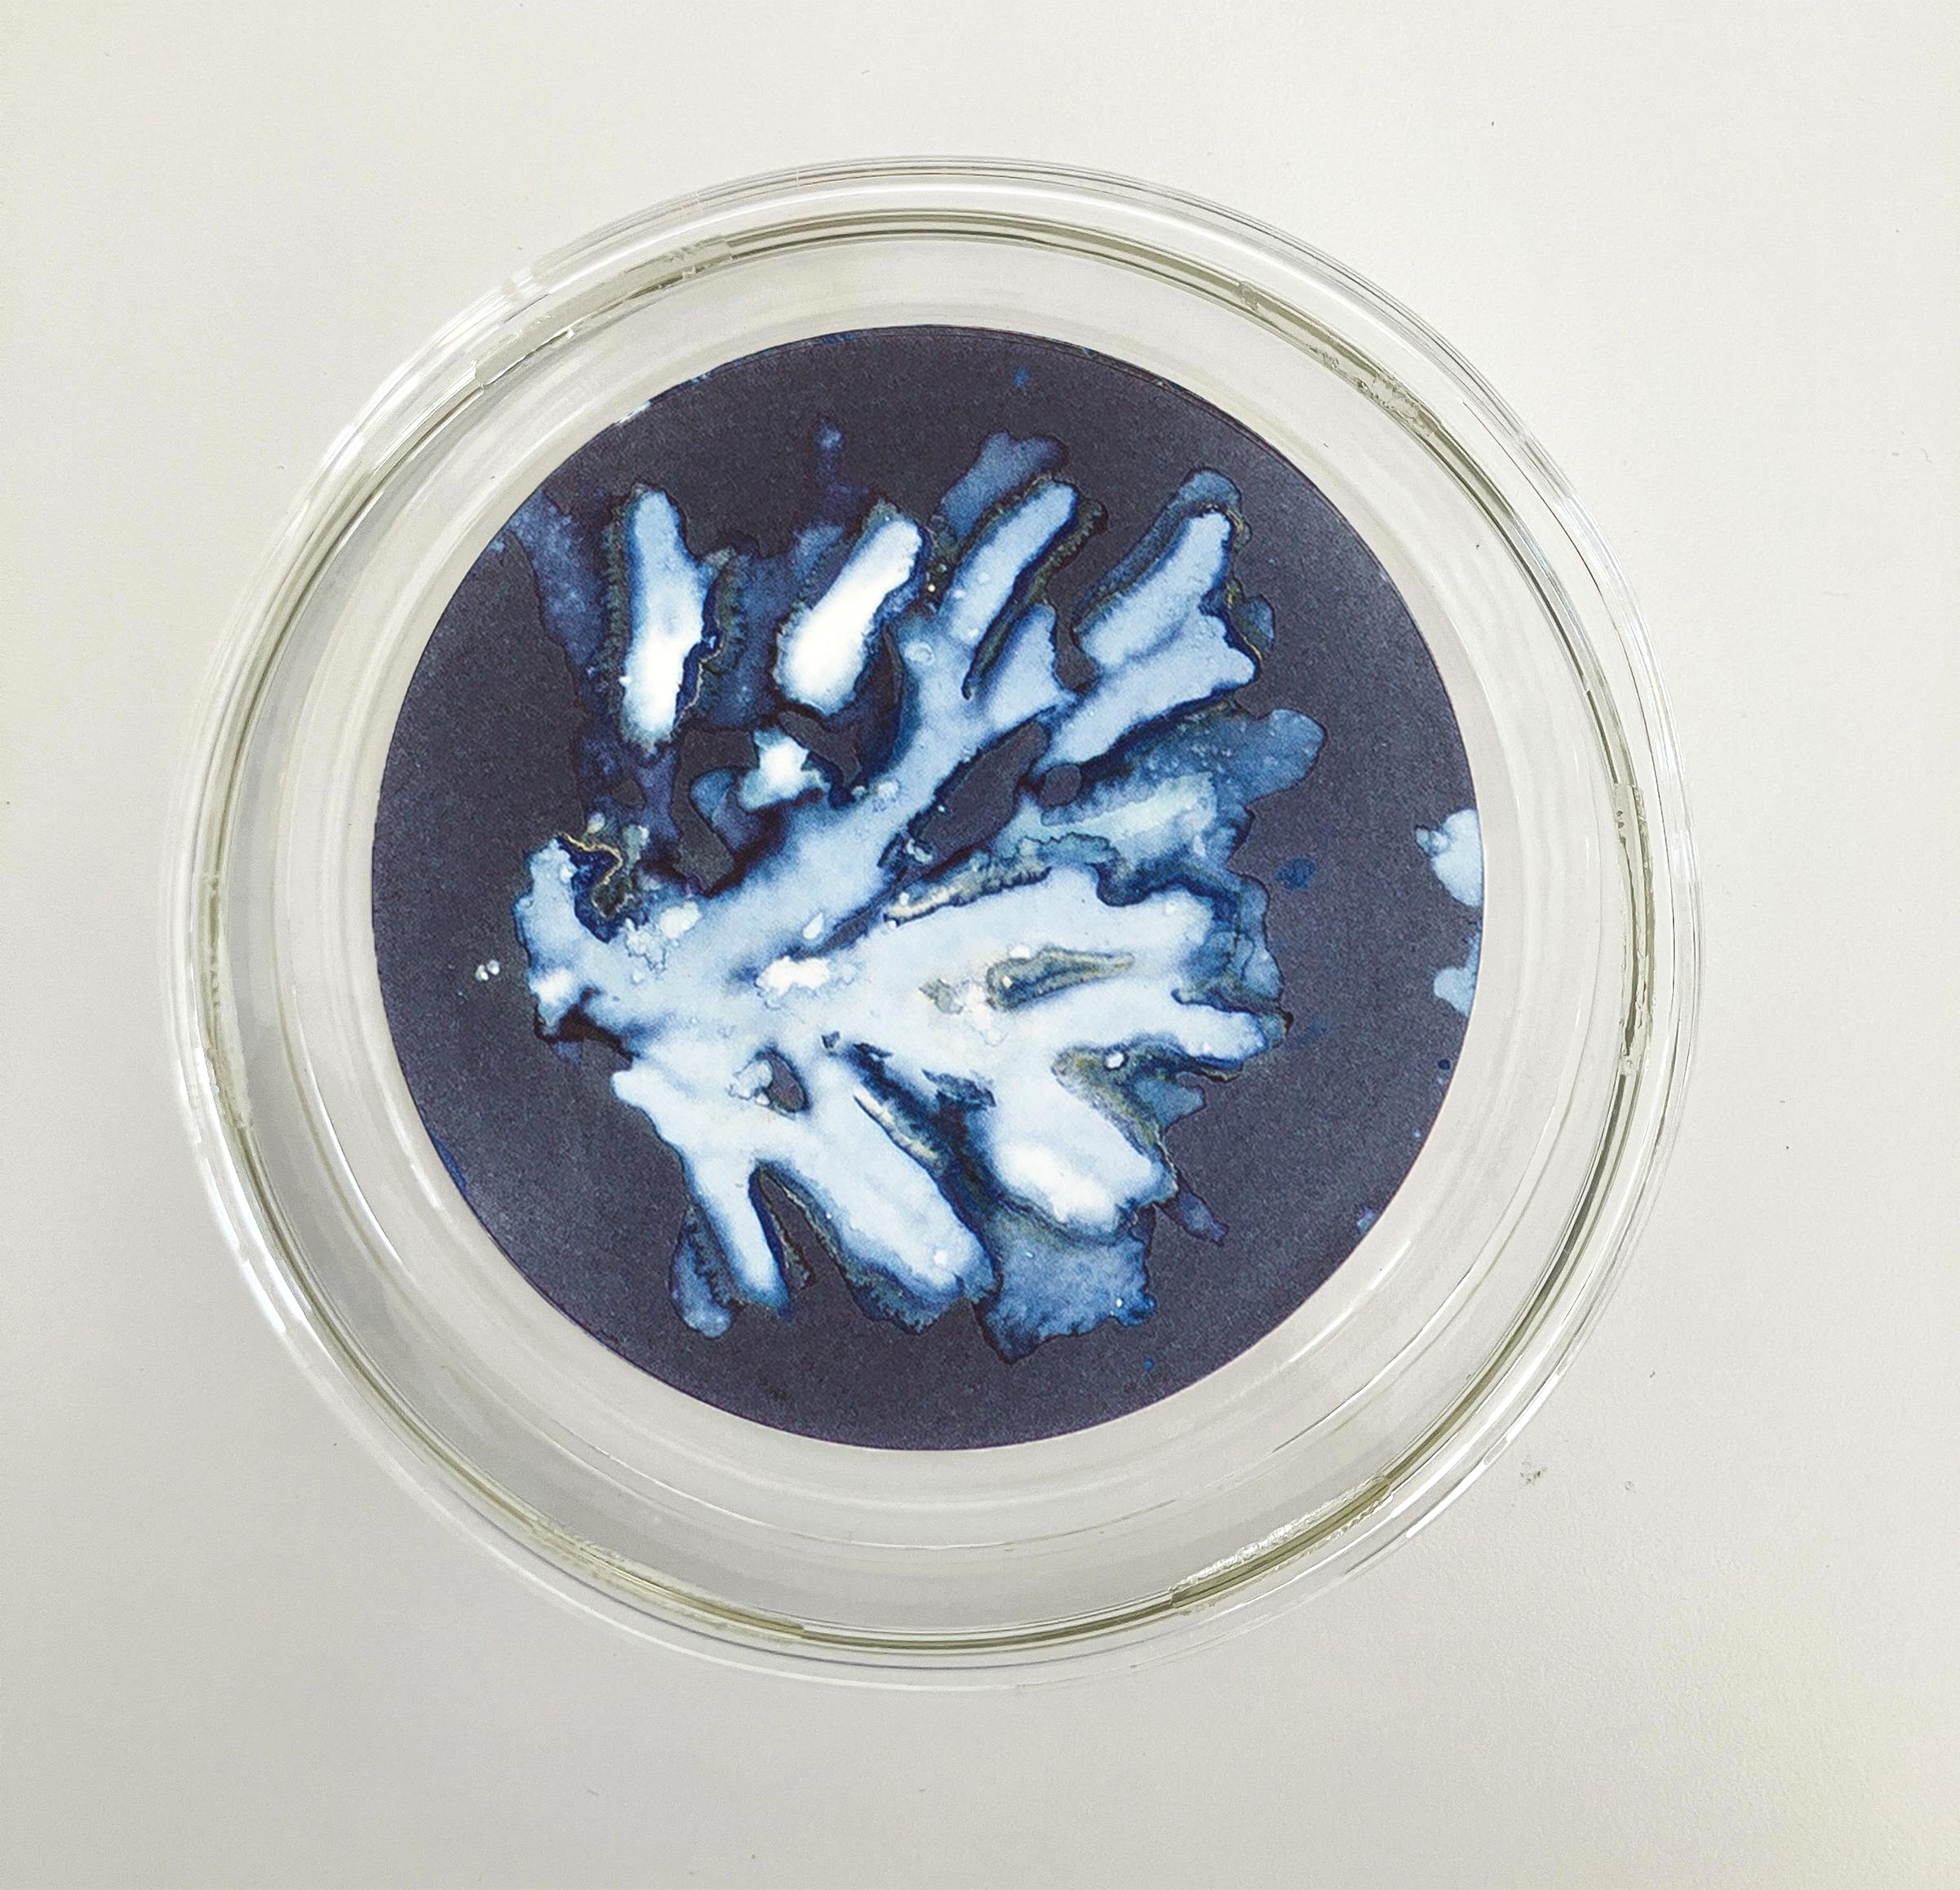 Algas 14, 41 y 68. Cyanotype photograhs mounted in high resistance glass dish For Sale 2